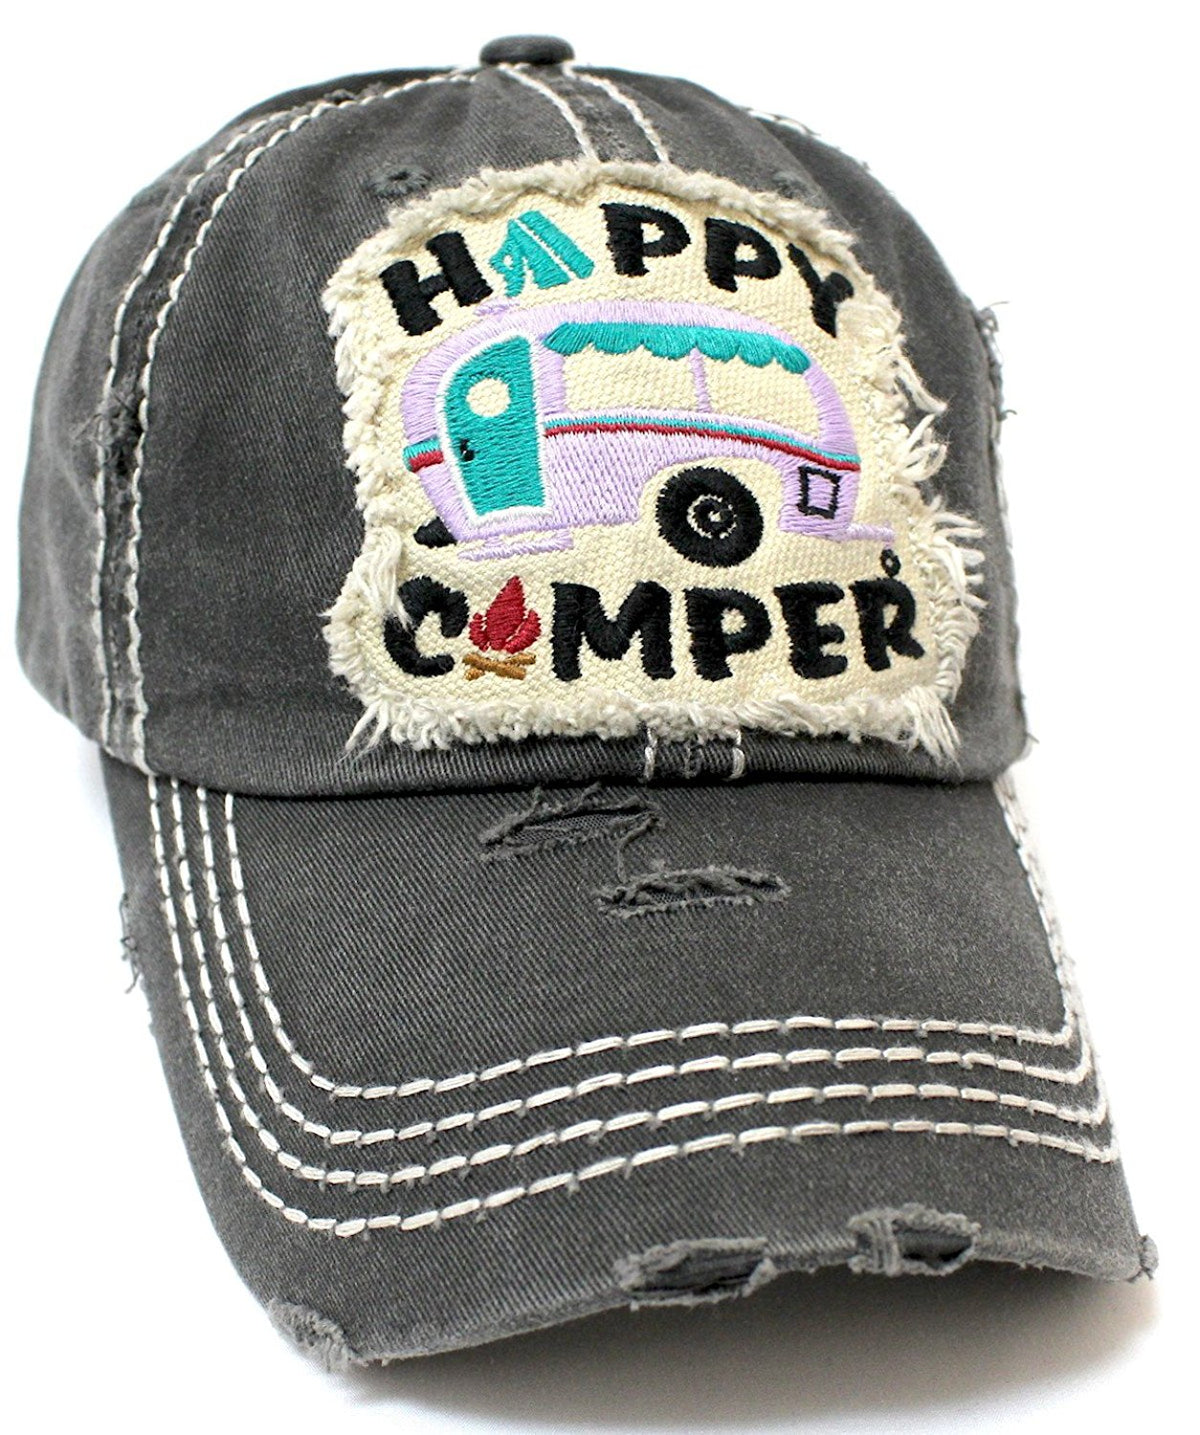 CAPS 'N VINTAGE Women's Happy Camper Camp Fire Patch Embroidery Baseball Hat-Blk/Blue - Caps 'N Vintage 